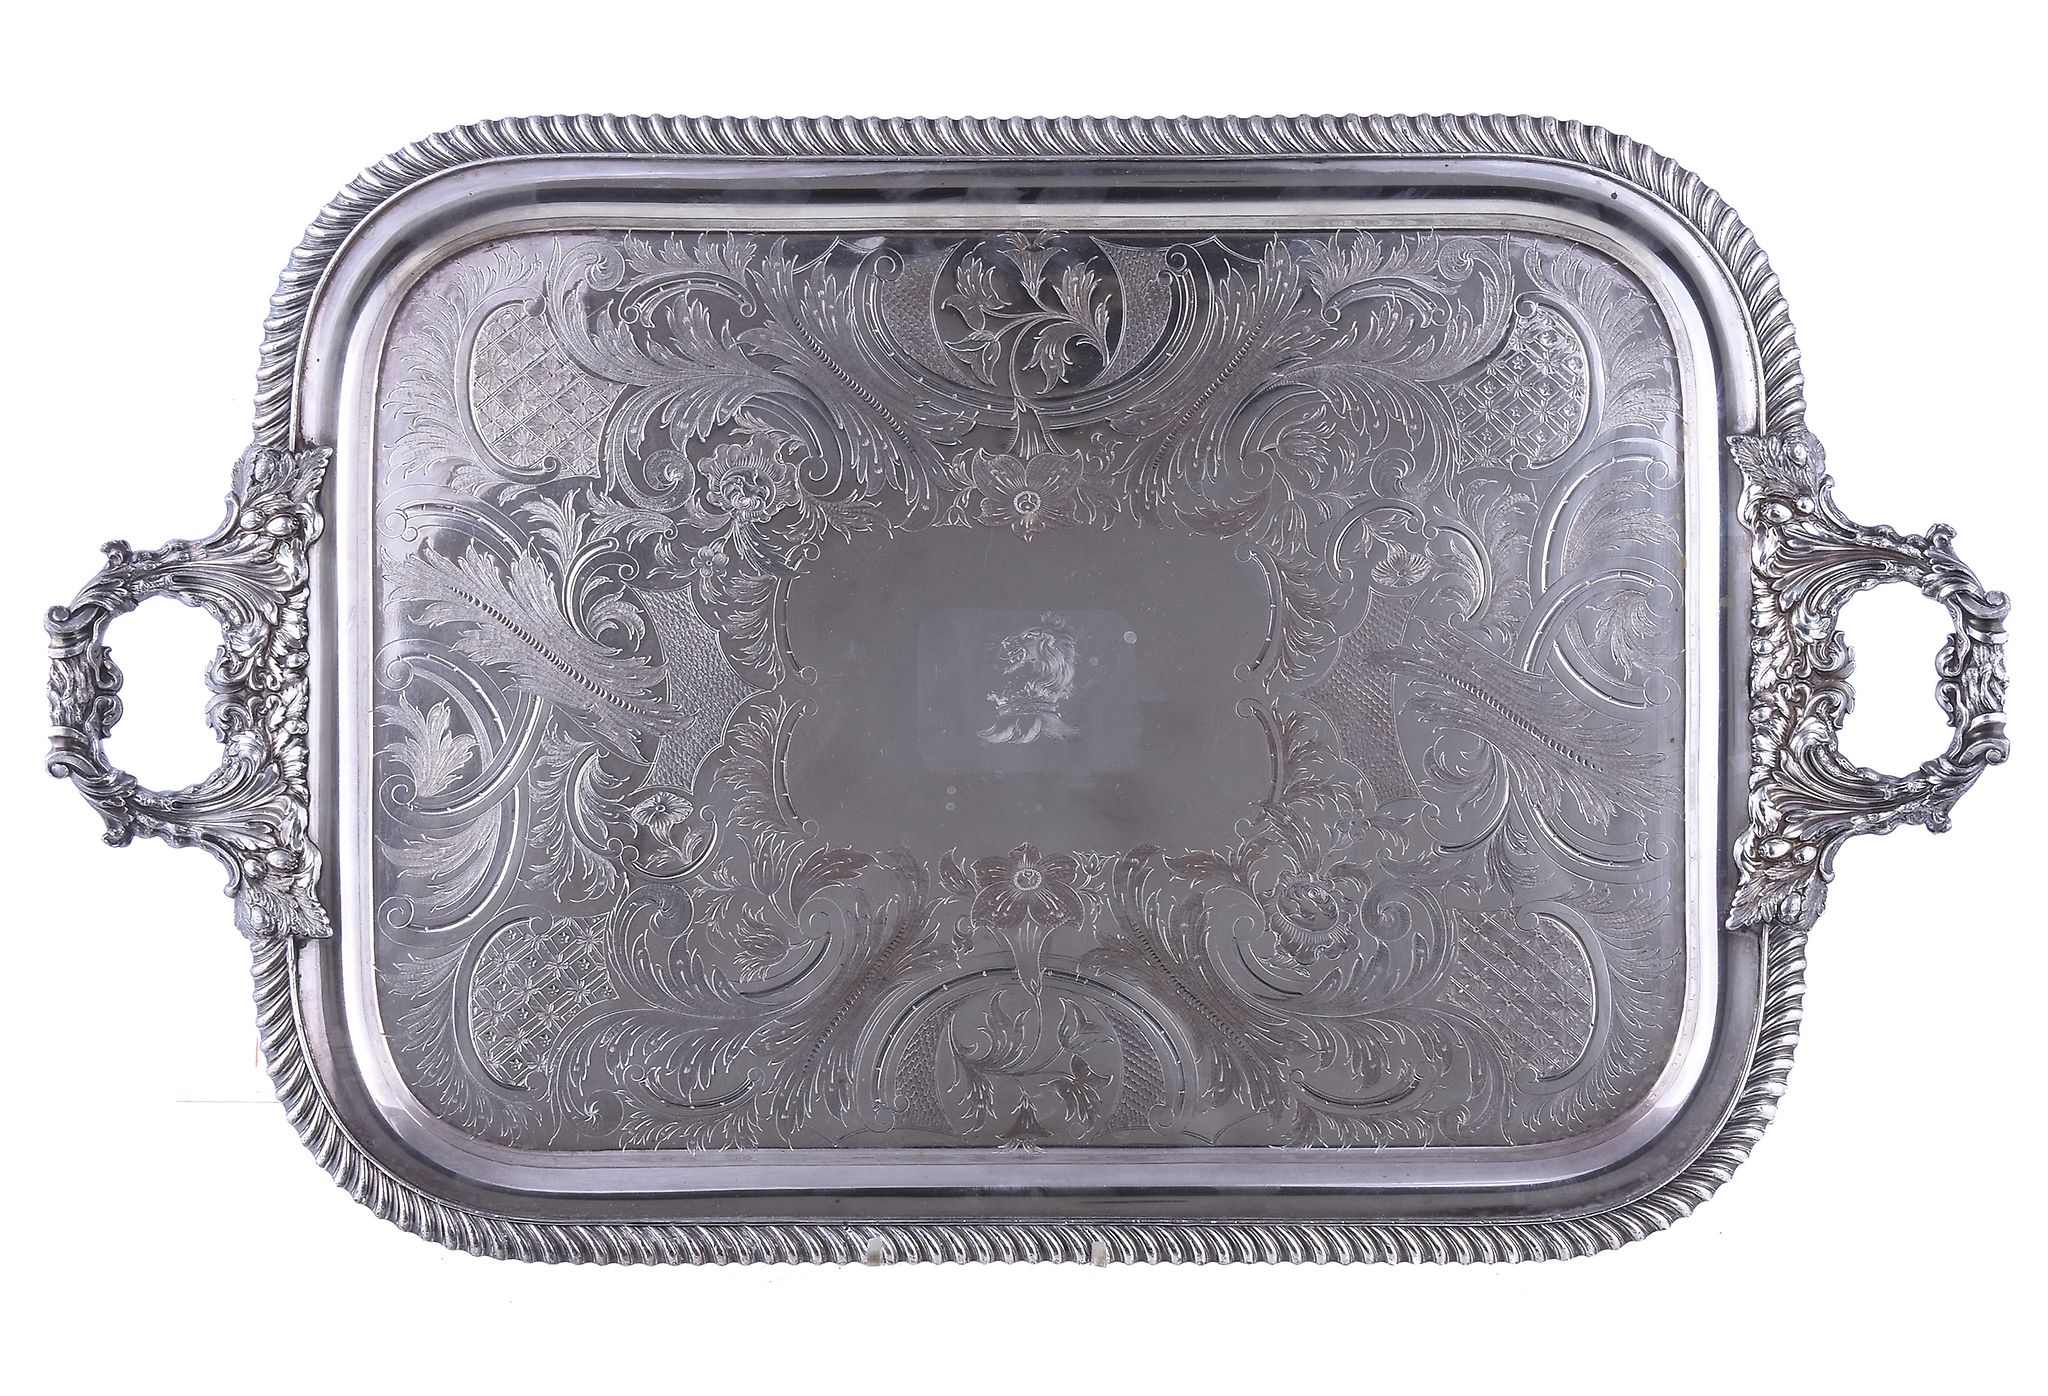 A Victorian electro-plated twin handled rectangular tray, circa 1850, with scroll foliate handles,